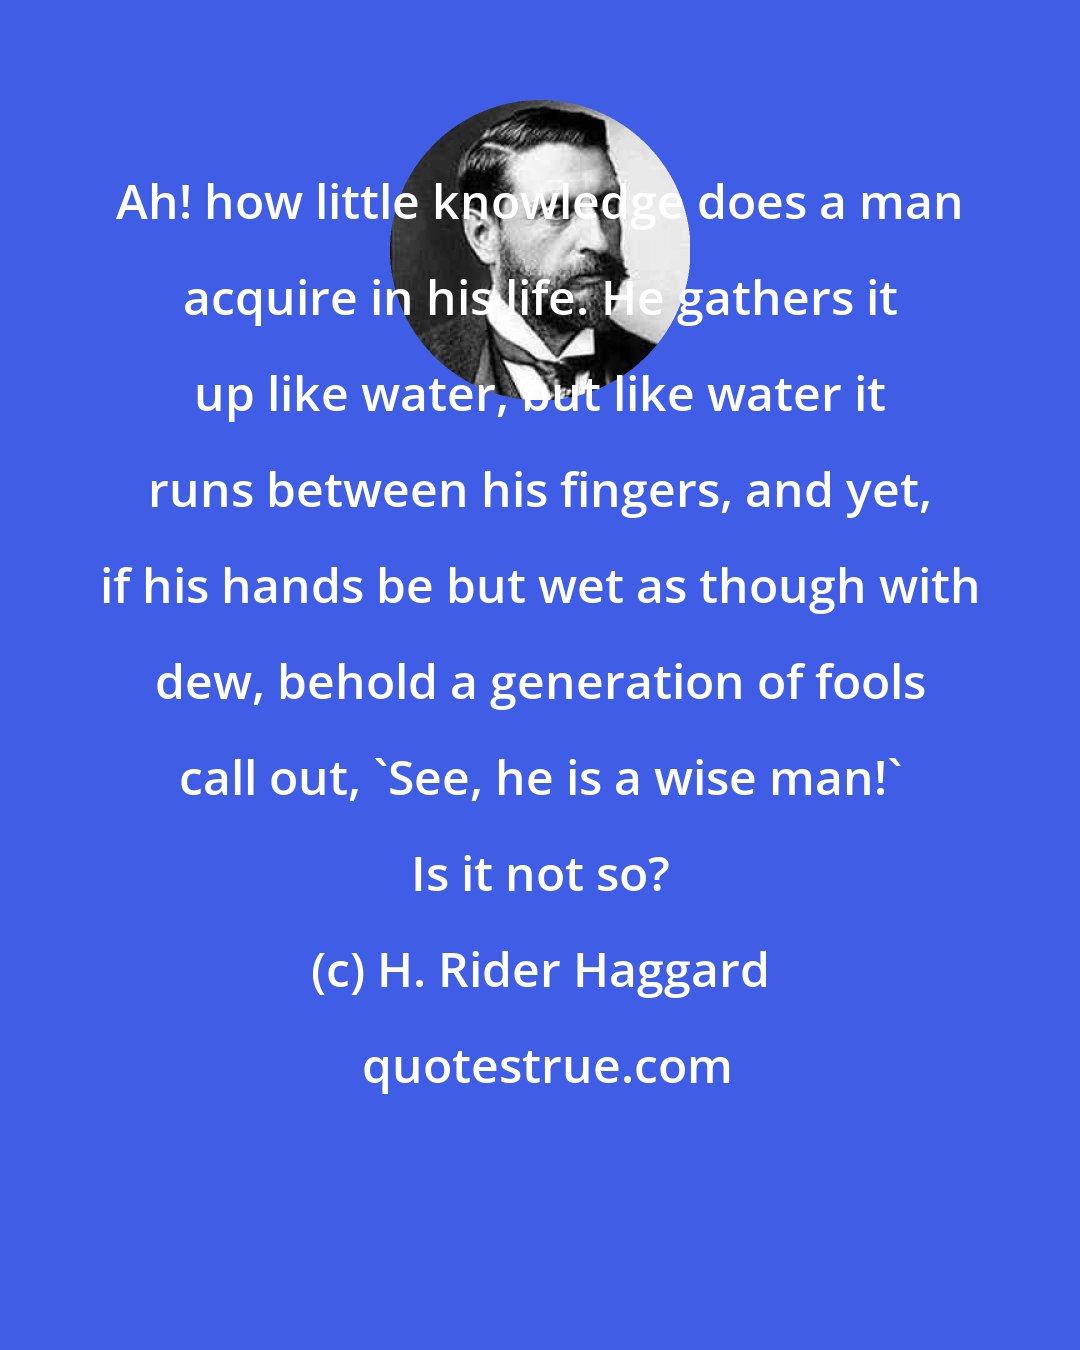 H. Rider Haggard: Ah! how little knowledge does a man acquire in his life. He gathers it up like water, but like water it runs between his fingers, and yet, if his hands be but wet as though with dew, behold a generation of fools call out, 'See, he is a wise man!' Is it not so?